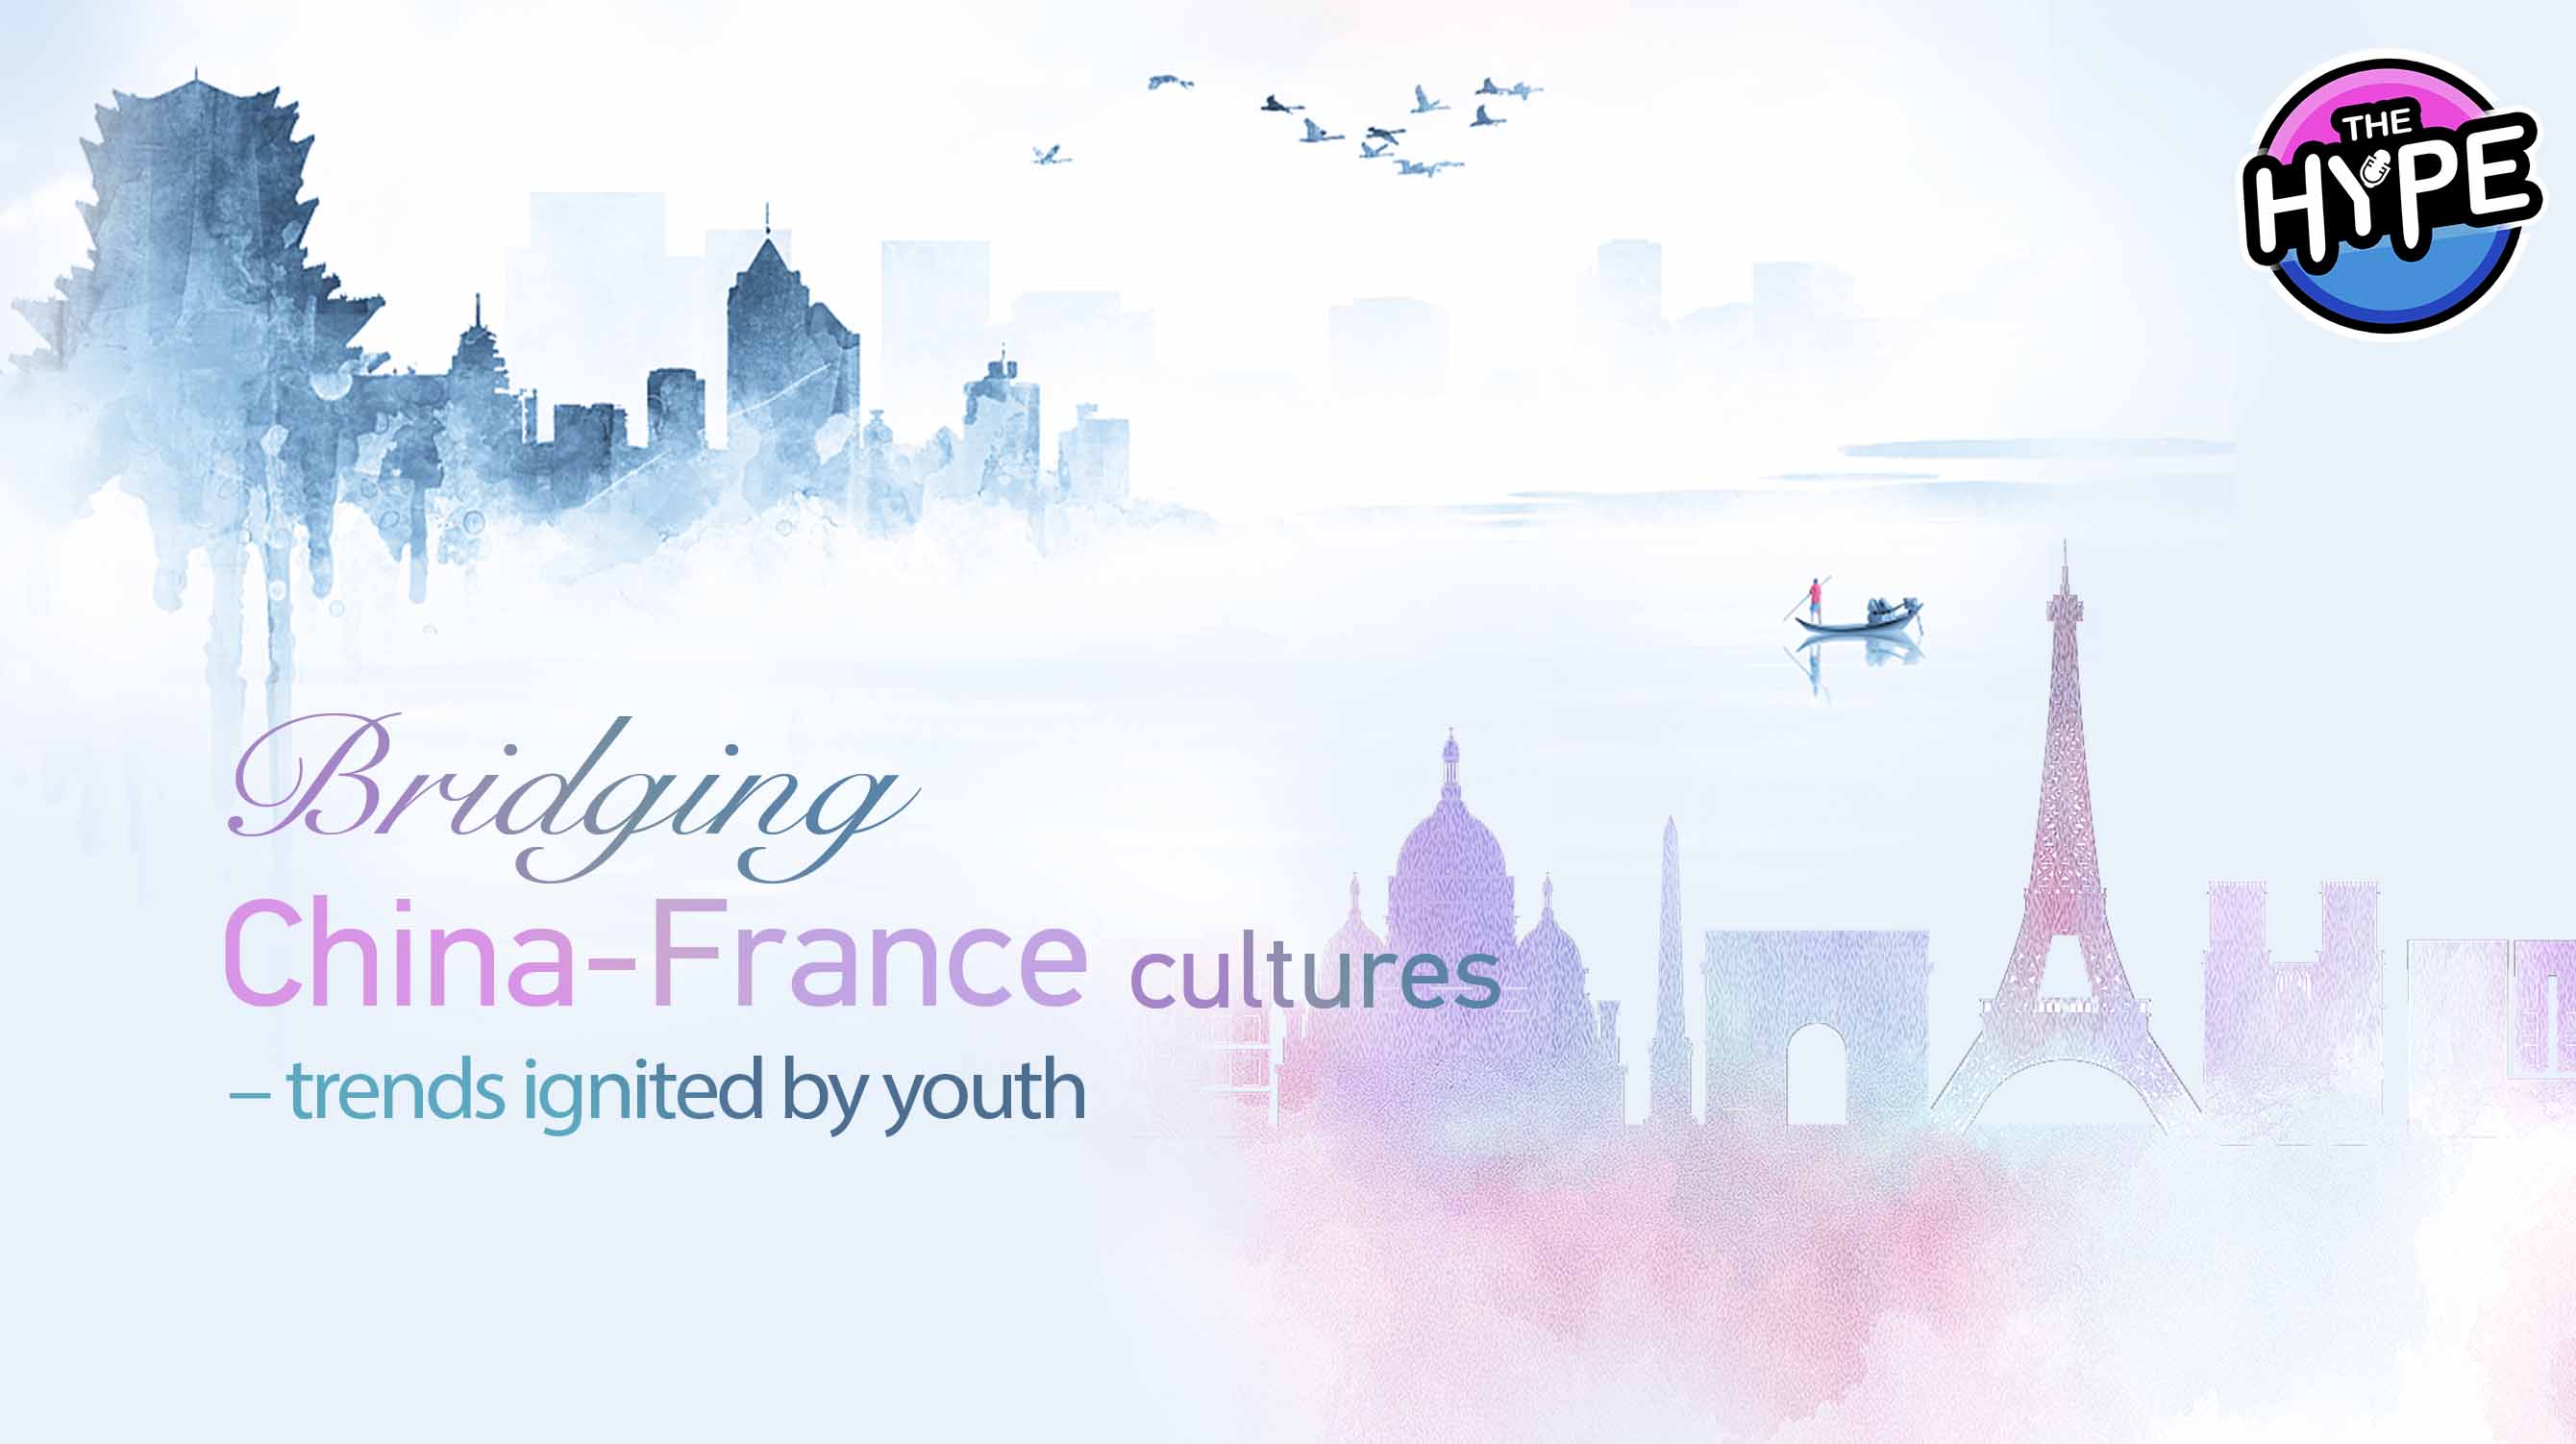 THE HYPE – Bridging China-France cultures, trends ignited by youth